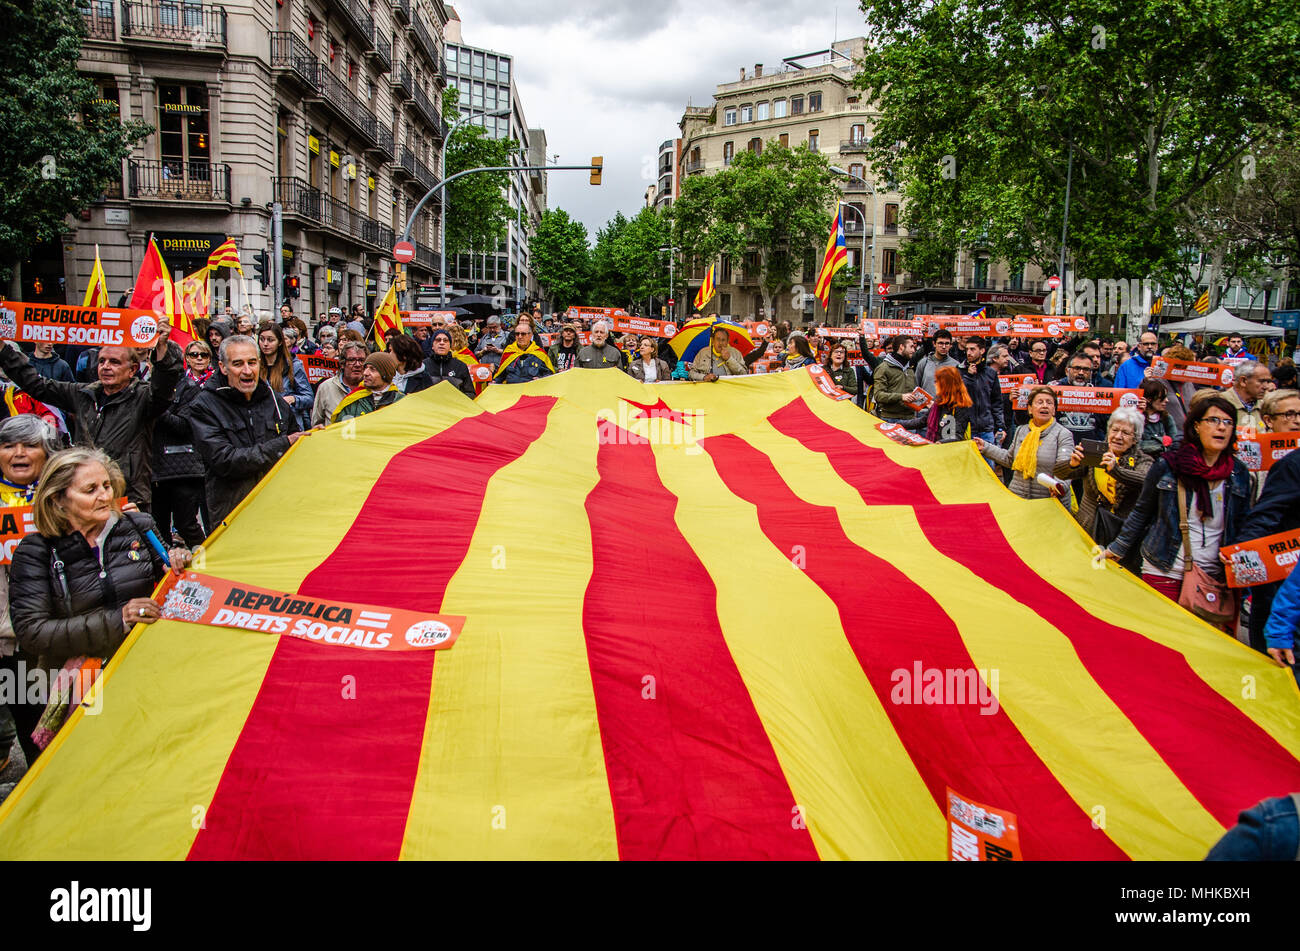 A great Catalan flag unfolds during the independence demonstration for the Republic and Social Rights. The Catalan independence movement has joined the May Day demonstrations, workers' day. Under the slogan For the Republic and social rights, hundreds of people have demonstrated in the center of Barcelona Stock Photo